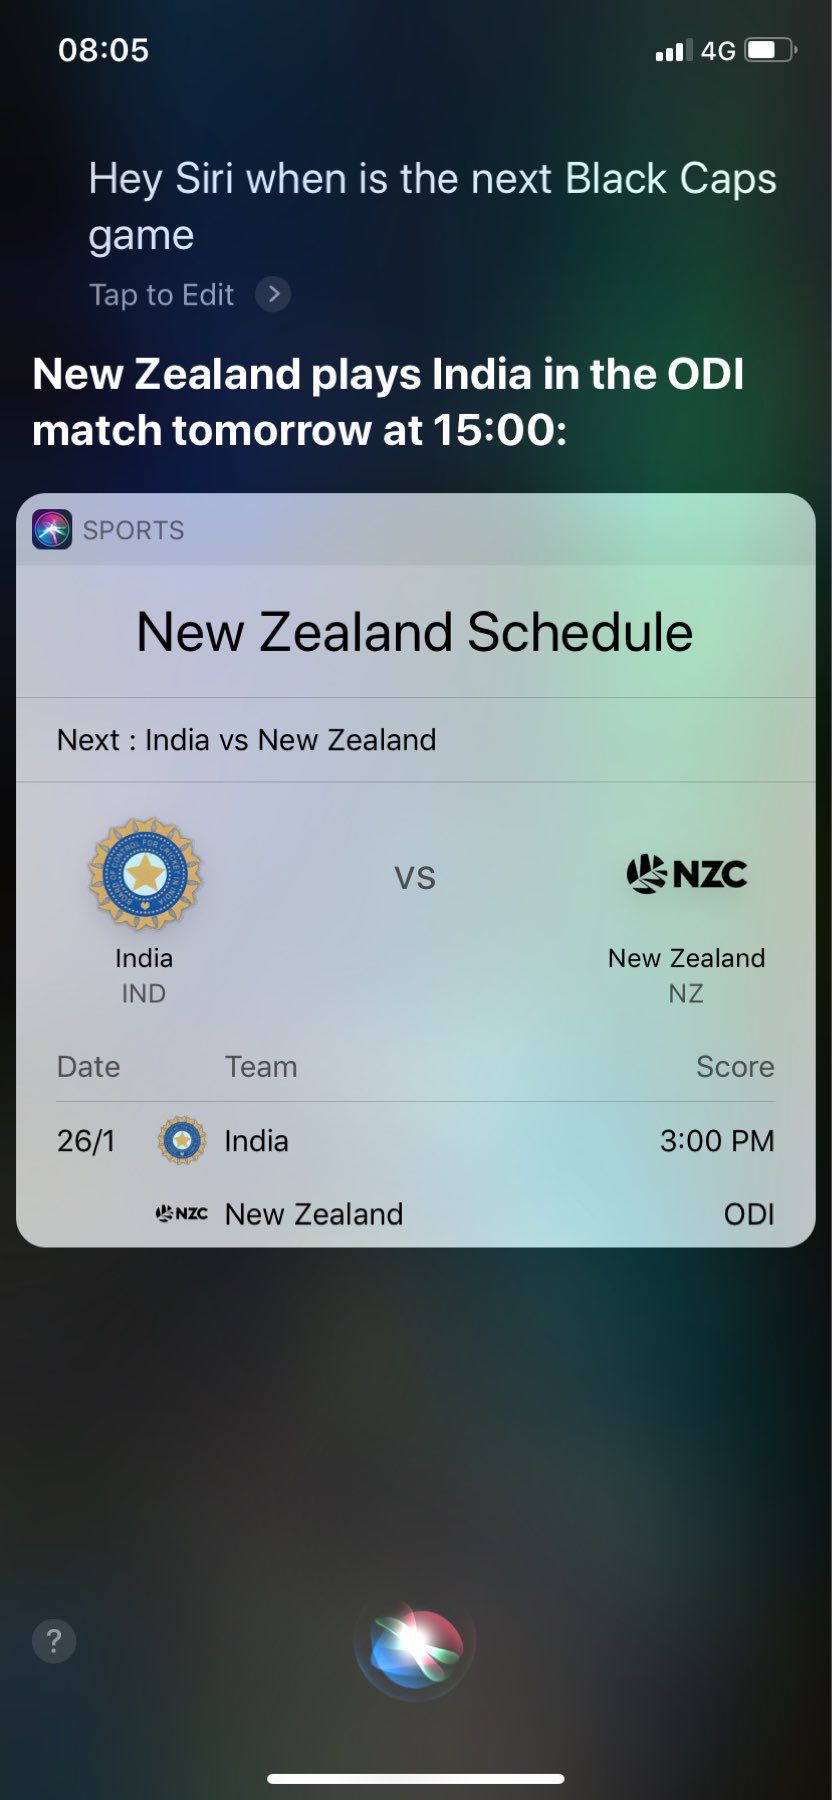 A Siri information screen showing details of the next Blackcaps v India ODI game.